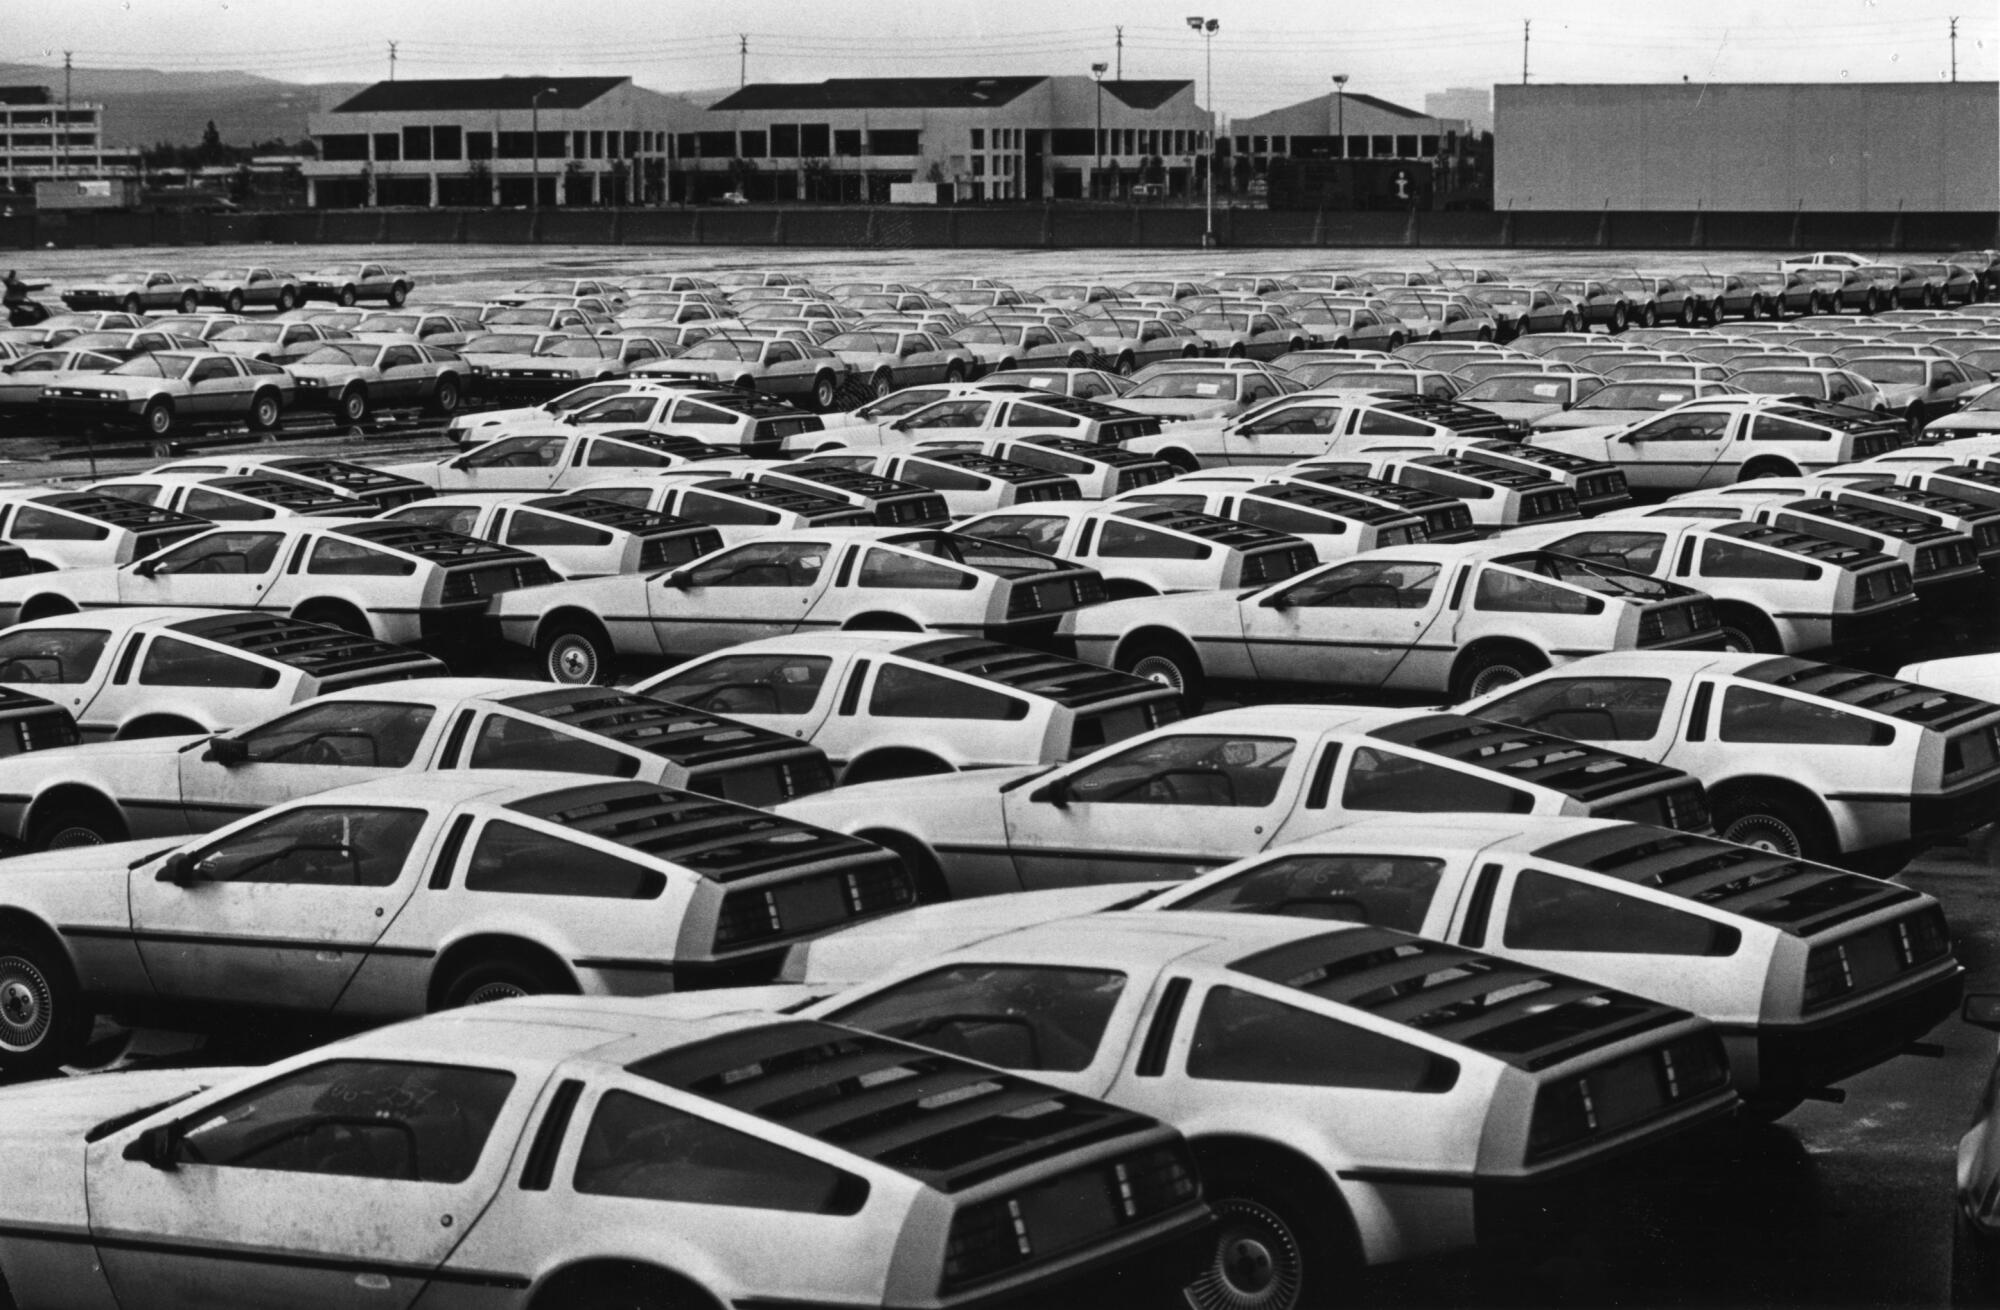 Cars of the same model in a lot as far as the eye can see.